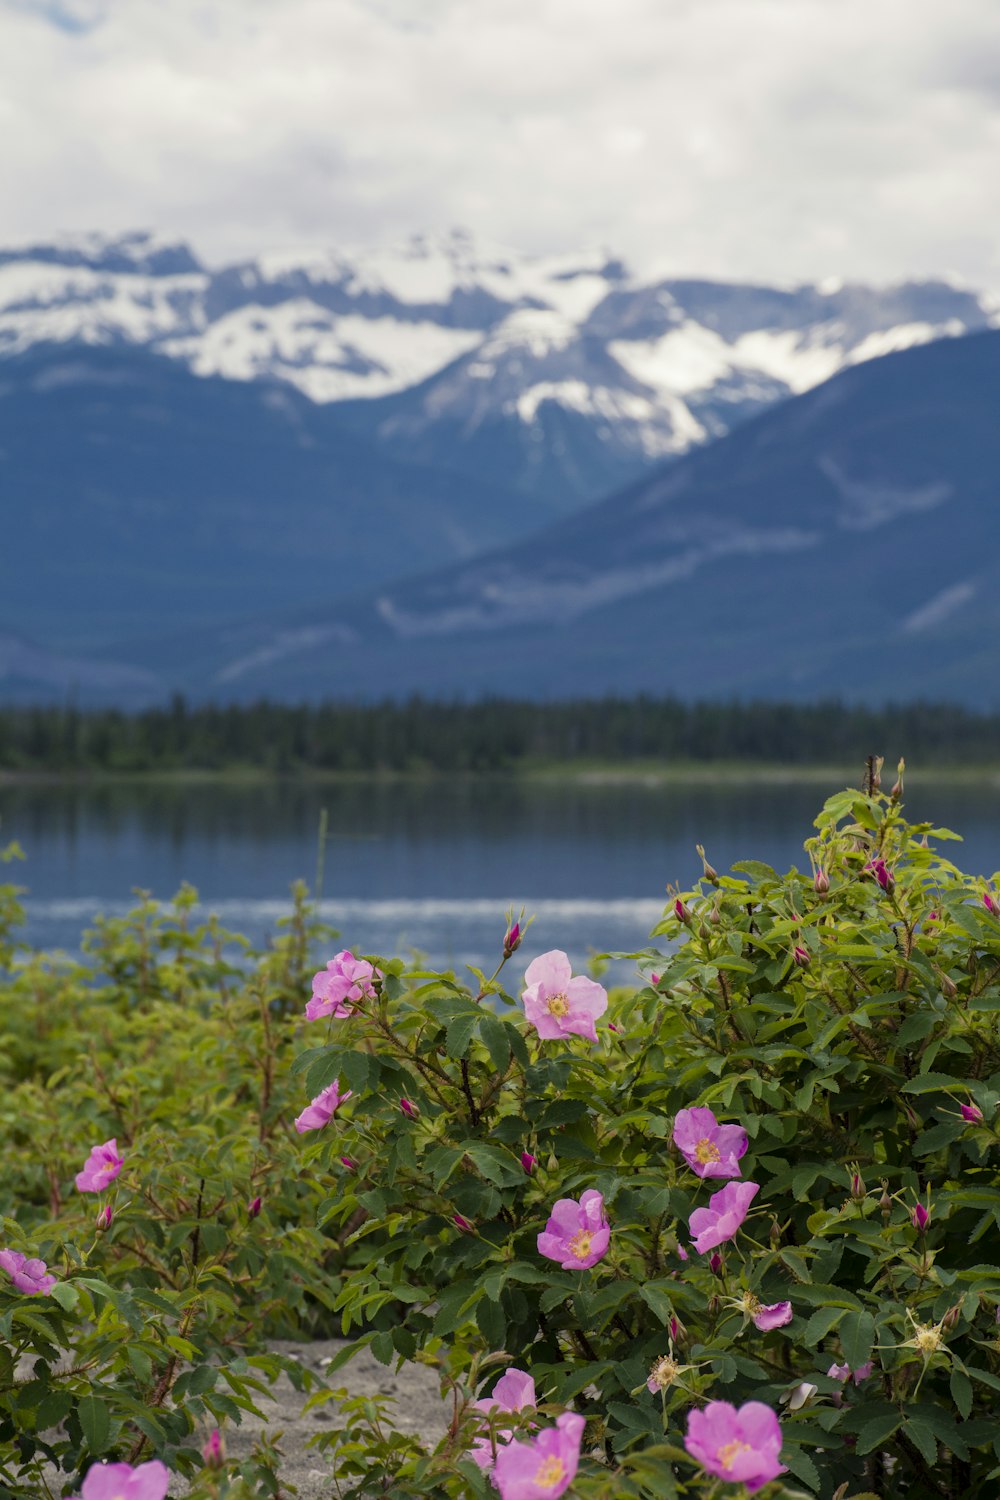 pink flowers near lake and mountains during daytime